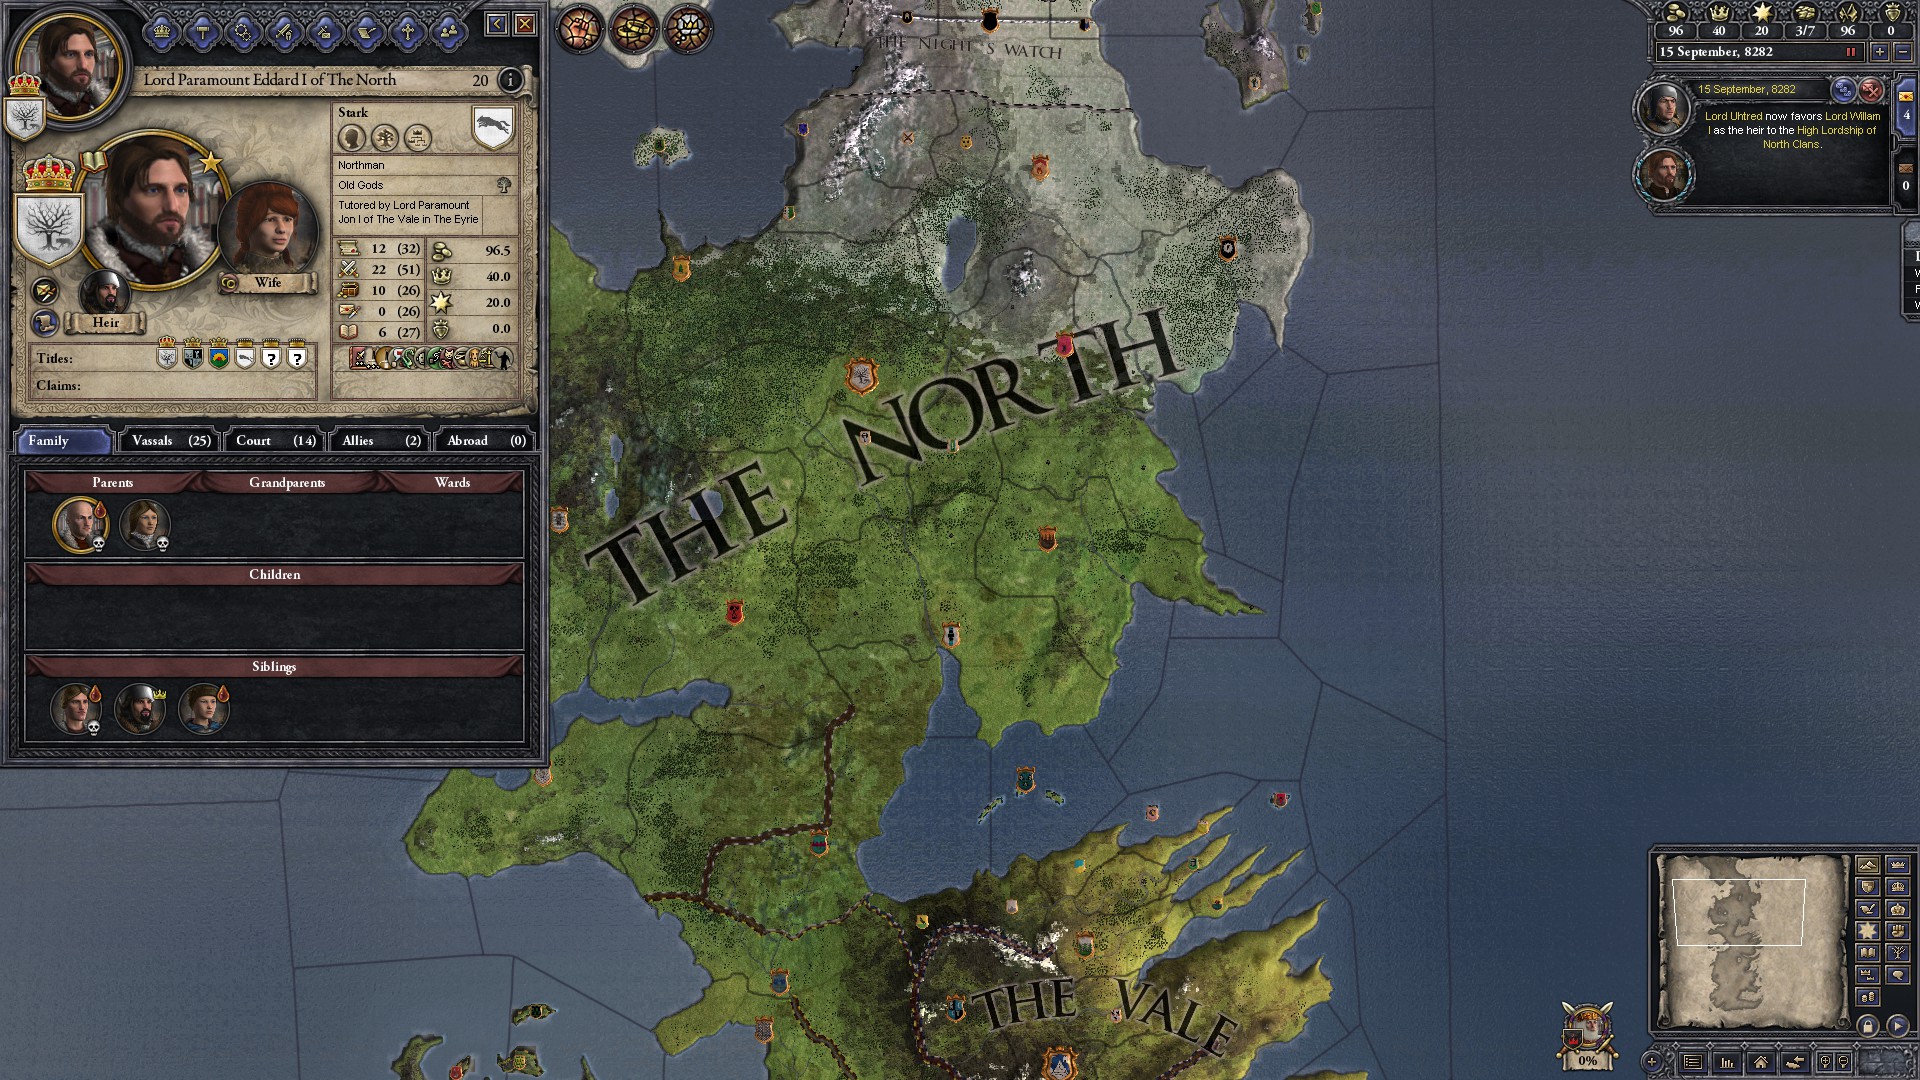 Best Game of Thrones games: Crusader Kings 2. Image shows an in-game map.